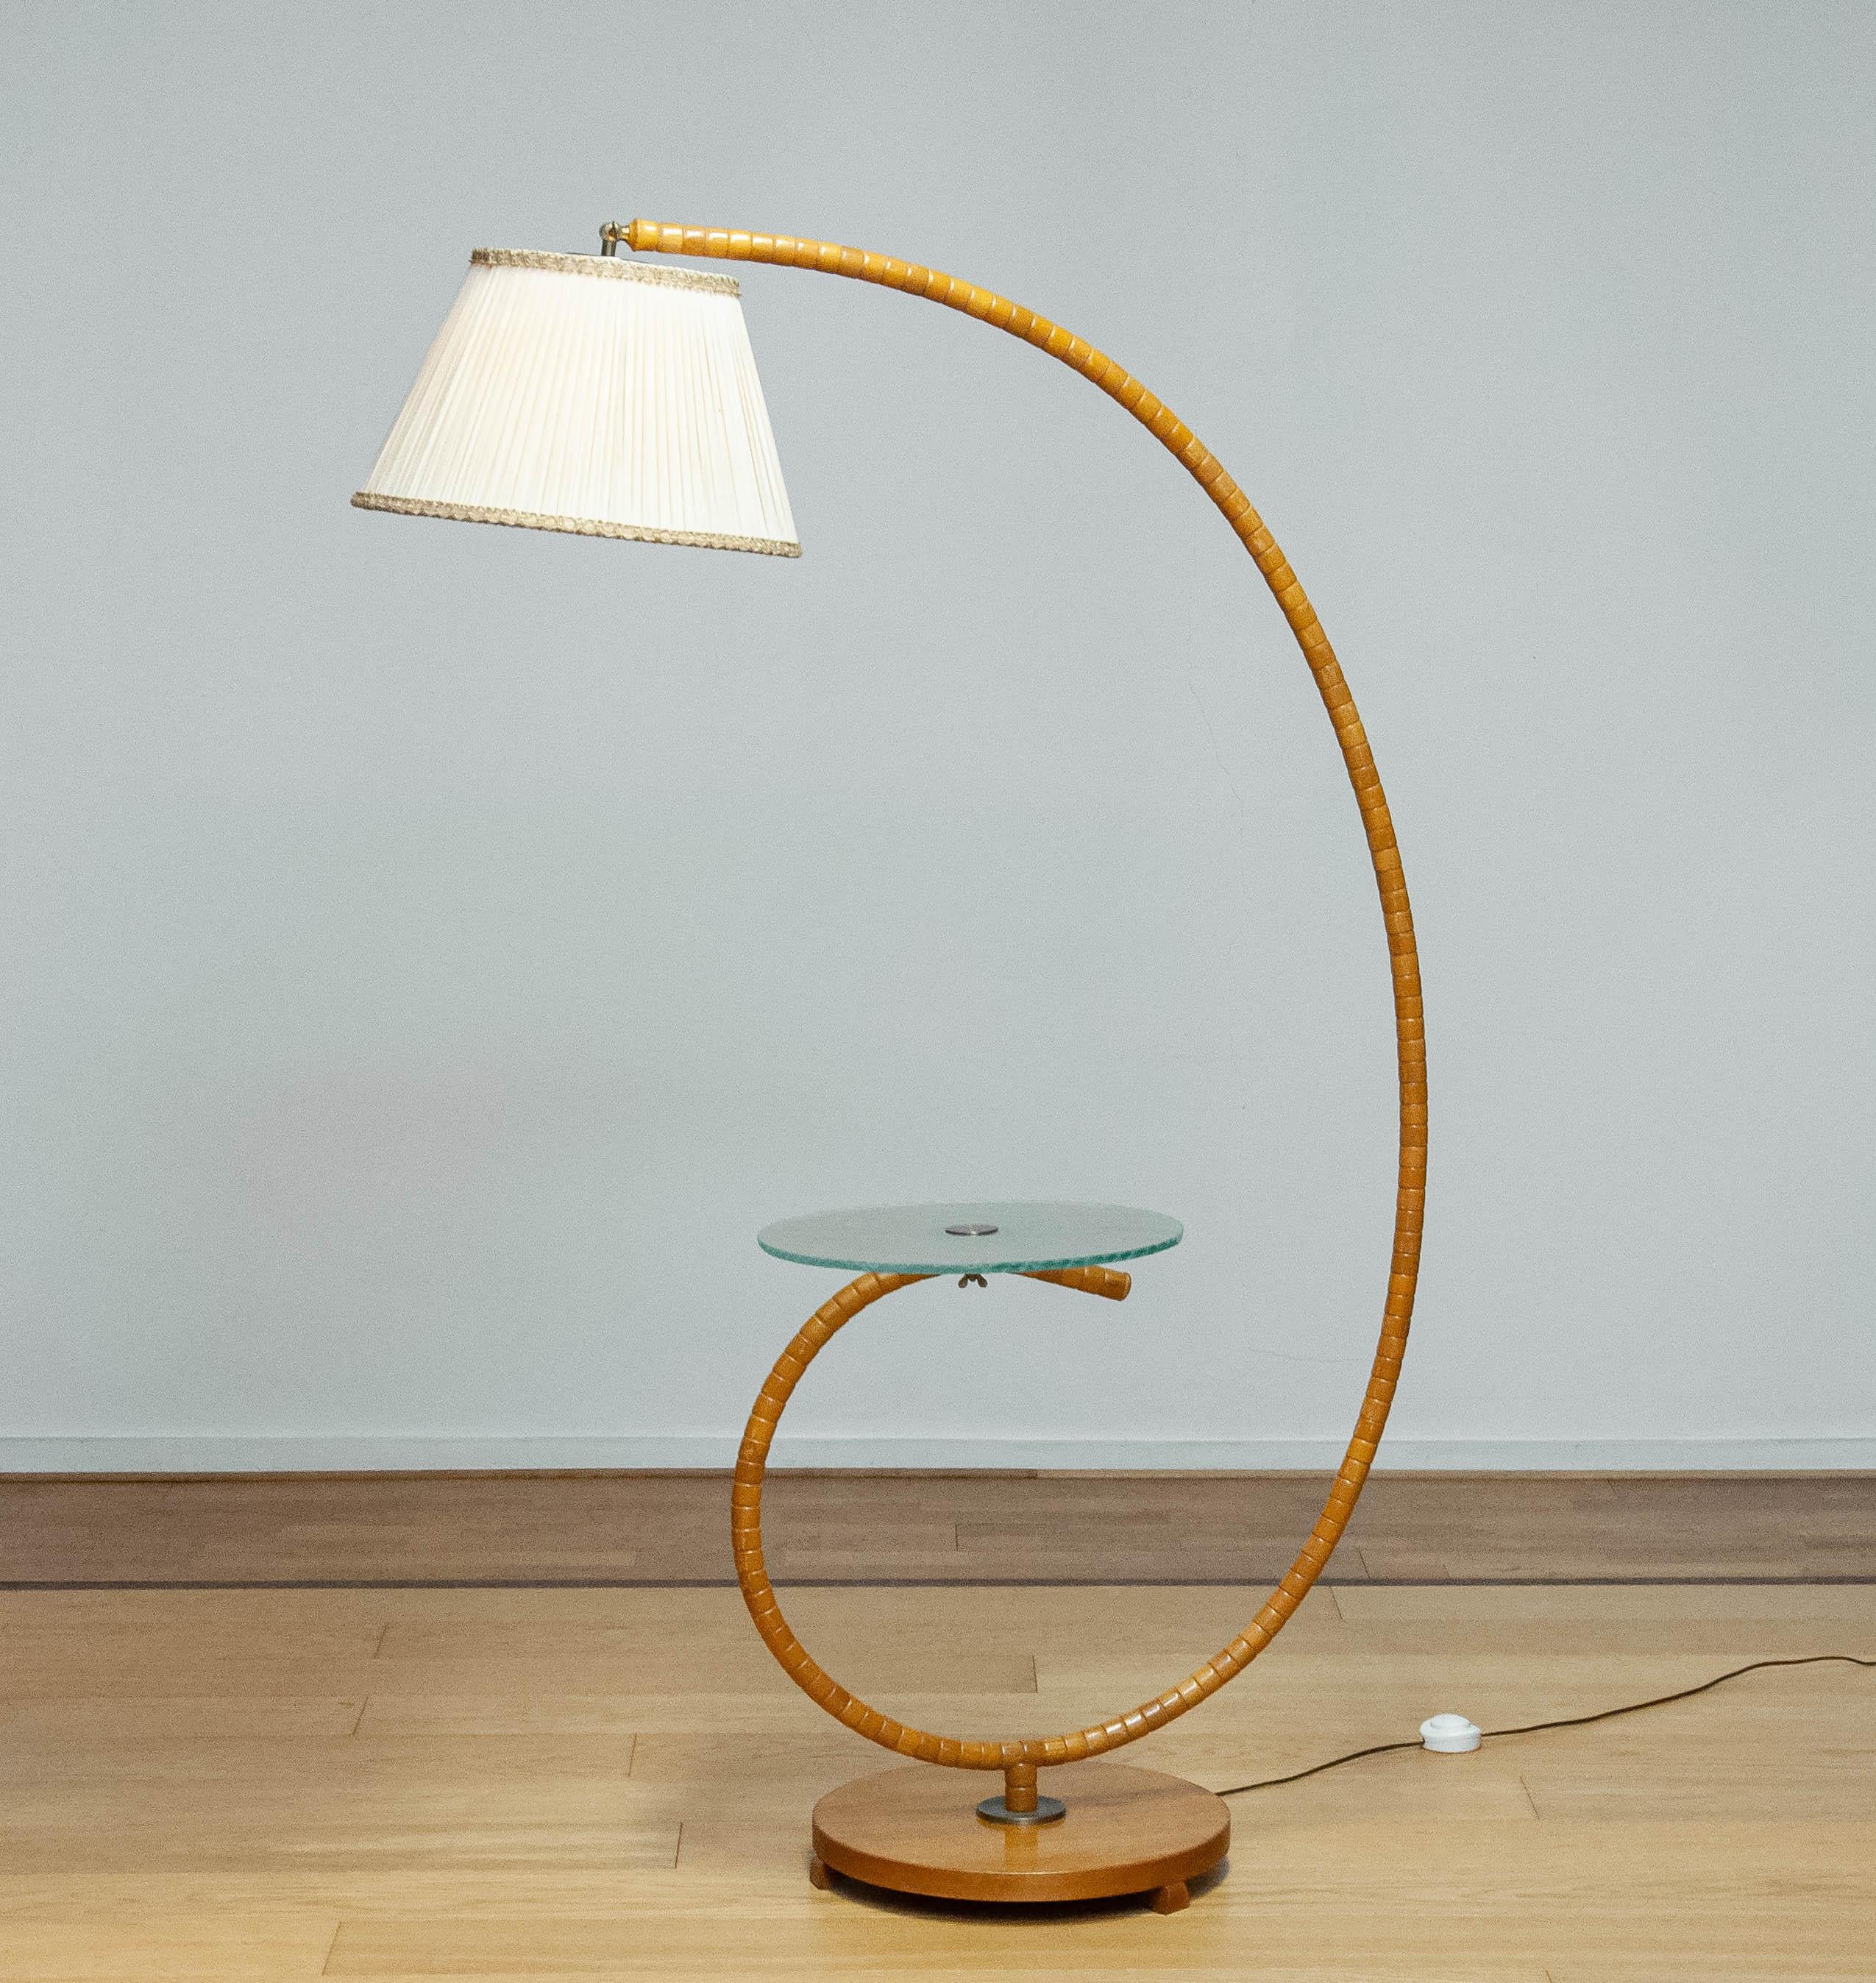 1940 Swedish Art Nouveau Floor Lamp In Elm By IWO Mariestad  And Magazine rack For Sale 5